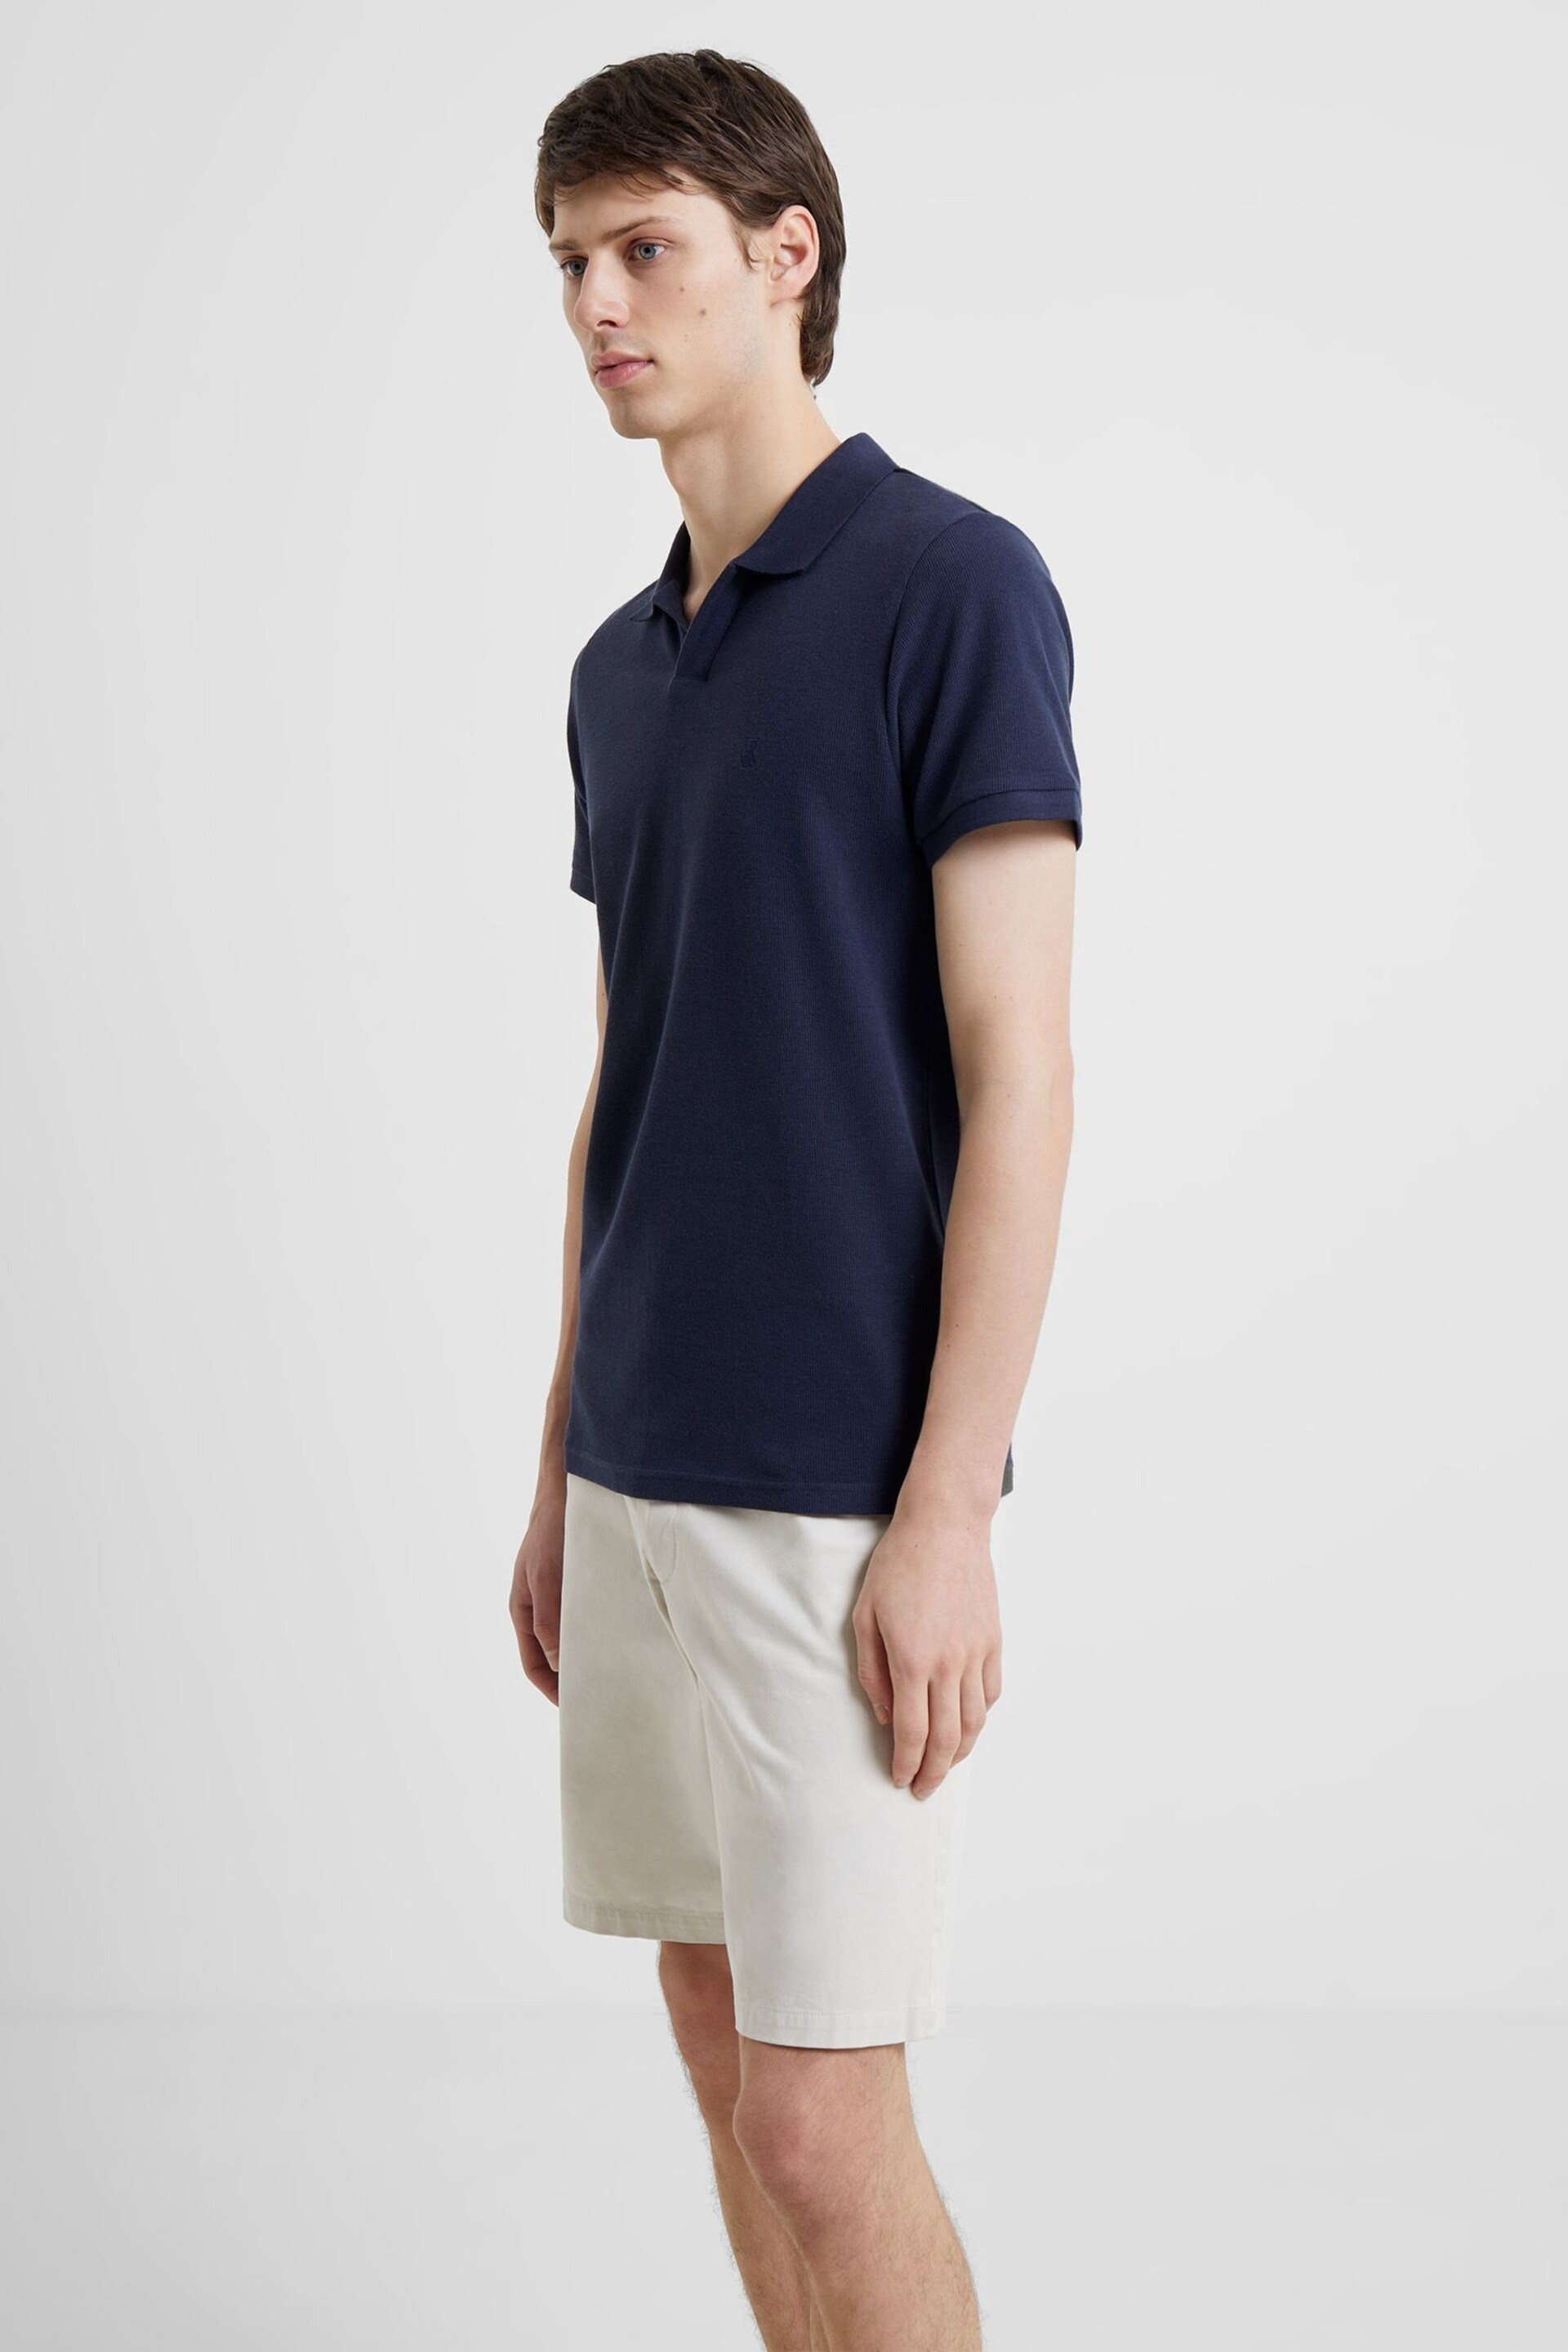 French Connection Marine Pique Micro Polo Shirt - Image 3 of 3